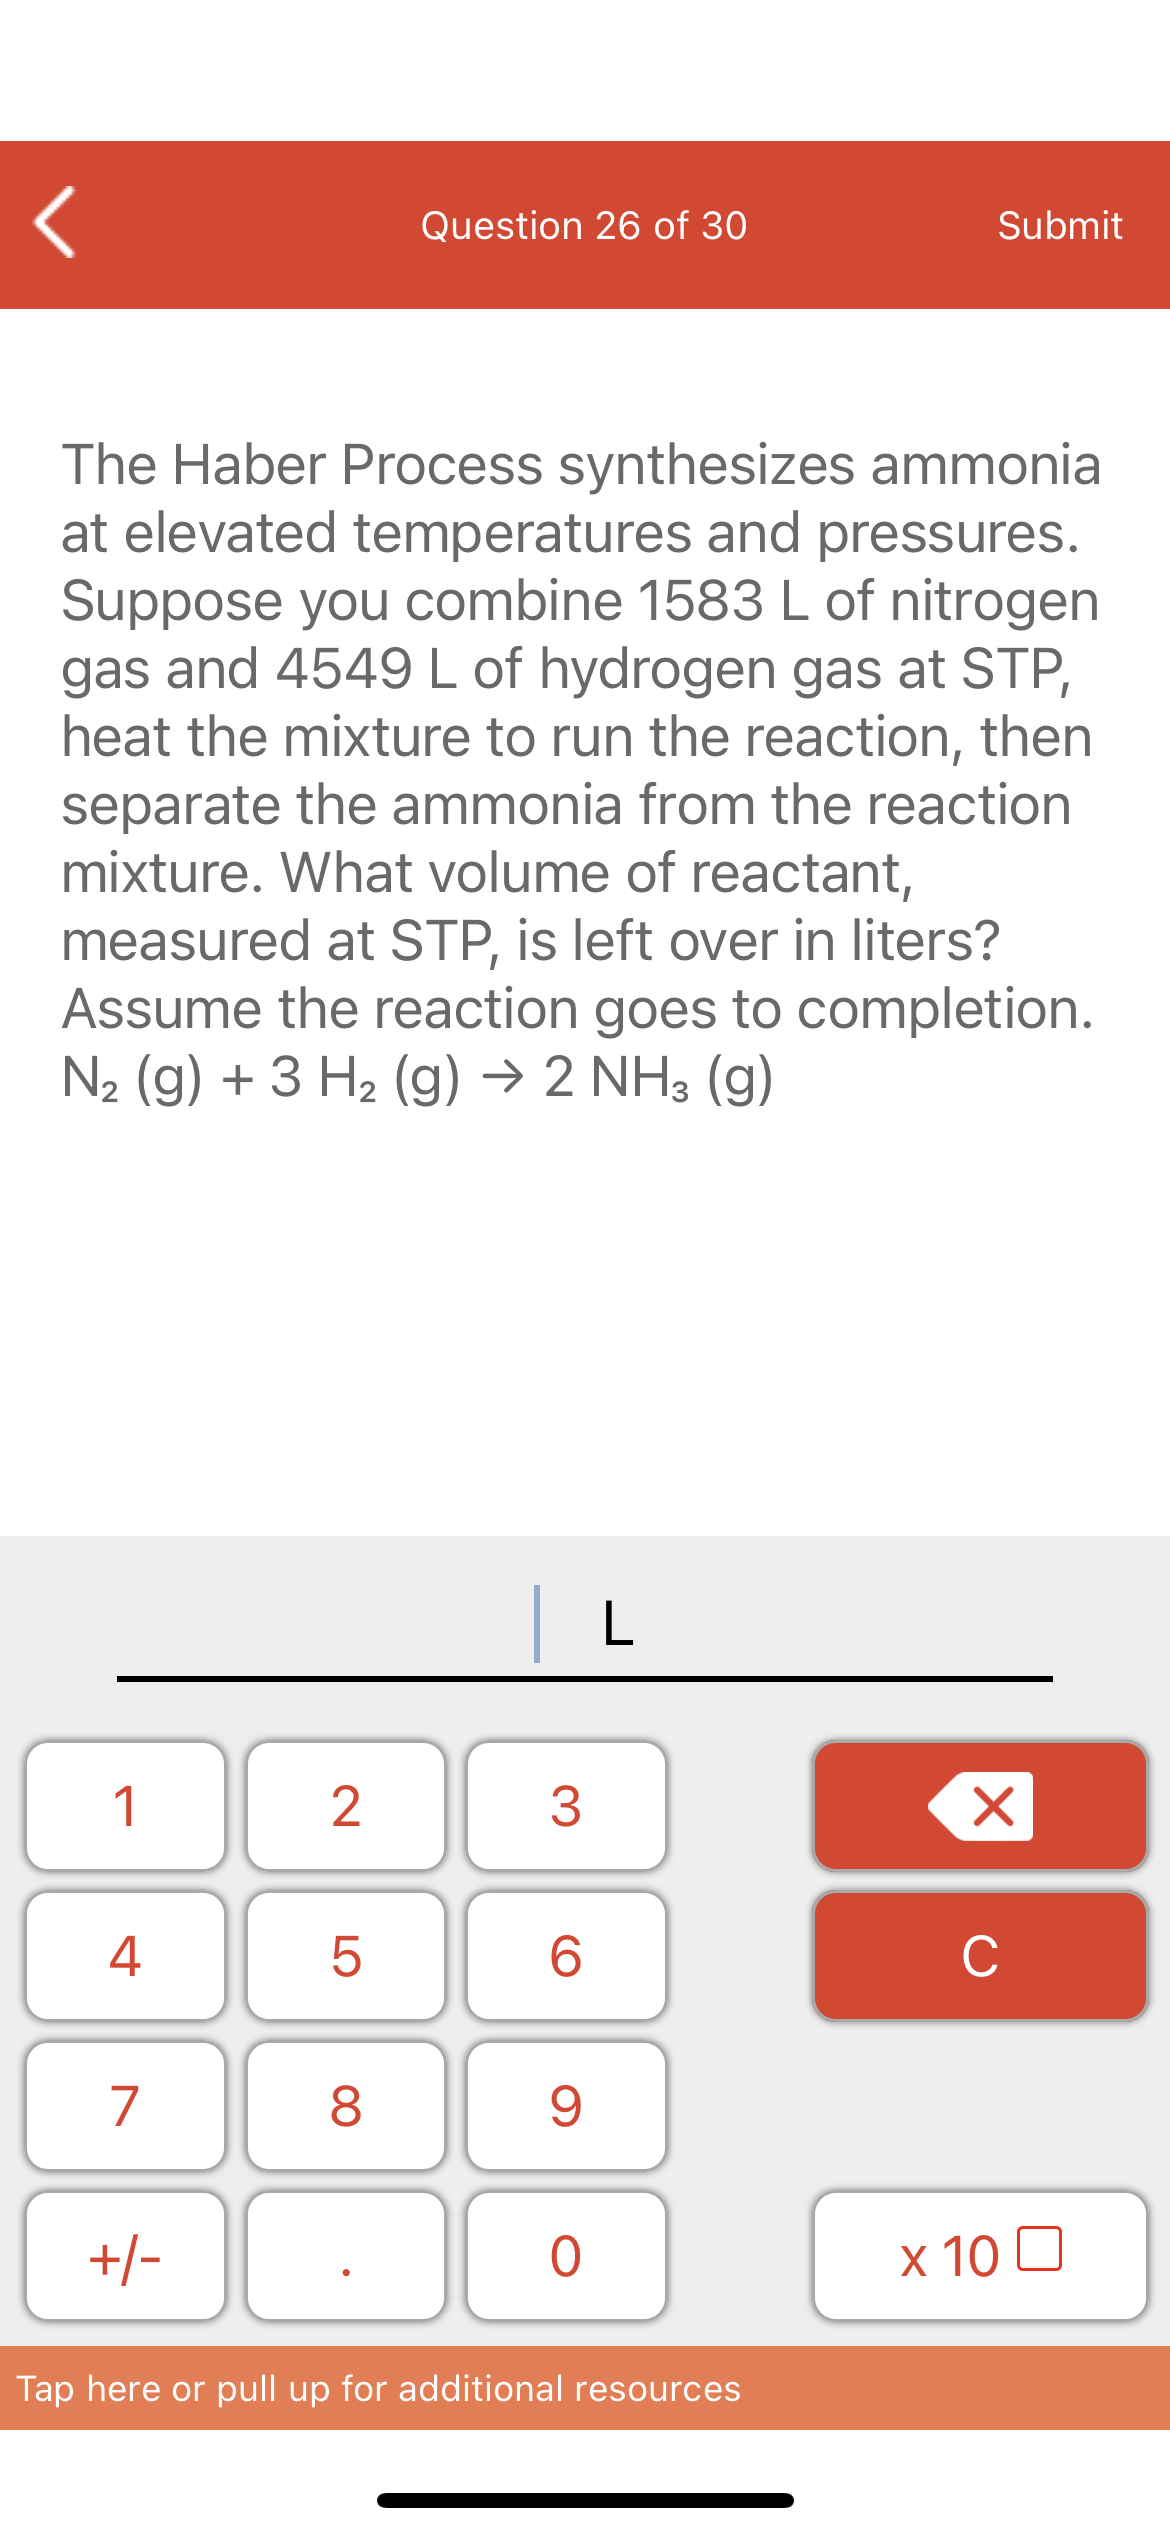 Question 26 of 30
Submit
The Haber Process synthesizes ammonia
at elevated temperatures and pressures.
Suppose you combine 1583 L of nitrogen
gas and 4549 L of hydrogen gas at STP,
heat the mixture to run the reaction, then
separate the ammonia from the reaction
mixture. What volume of reactant,
measured at STP, is left over in liters?
Assume the reaction goes to completion.
N2 (g) + 3 H2 (g) → 2 NH3 (g)
|L
1
4
6.
C
7
+/-
x 10 0
Tap here or pull up for additional resources
LO
00
